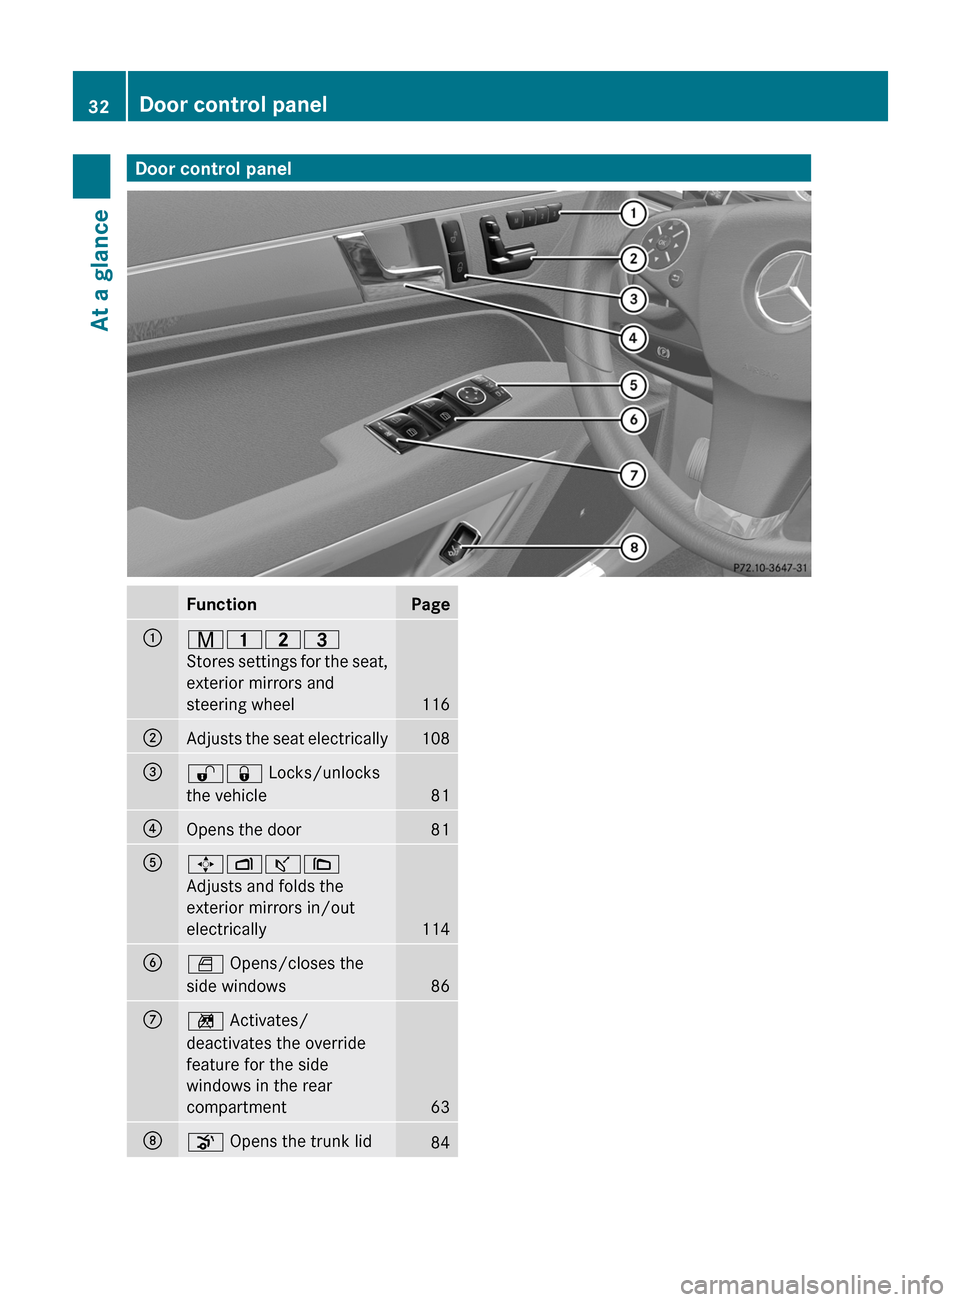 MERCEDES-BENZ E-Class COUPE 2011 C207 Owners Guide Door control panelFunctionPage:r45=
Stores settings for the seat,
exterior mirrors and
steering wheel116
;Adjusts the seat electrically108=%& Locks/unlocks
the vehicle81
?Opens the door81A7Zª\
Adjust